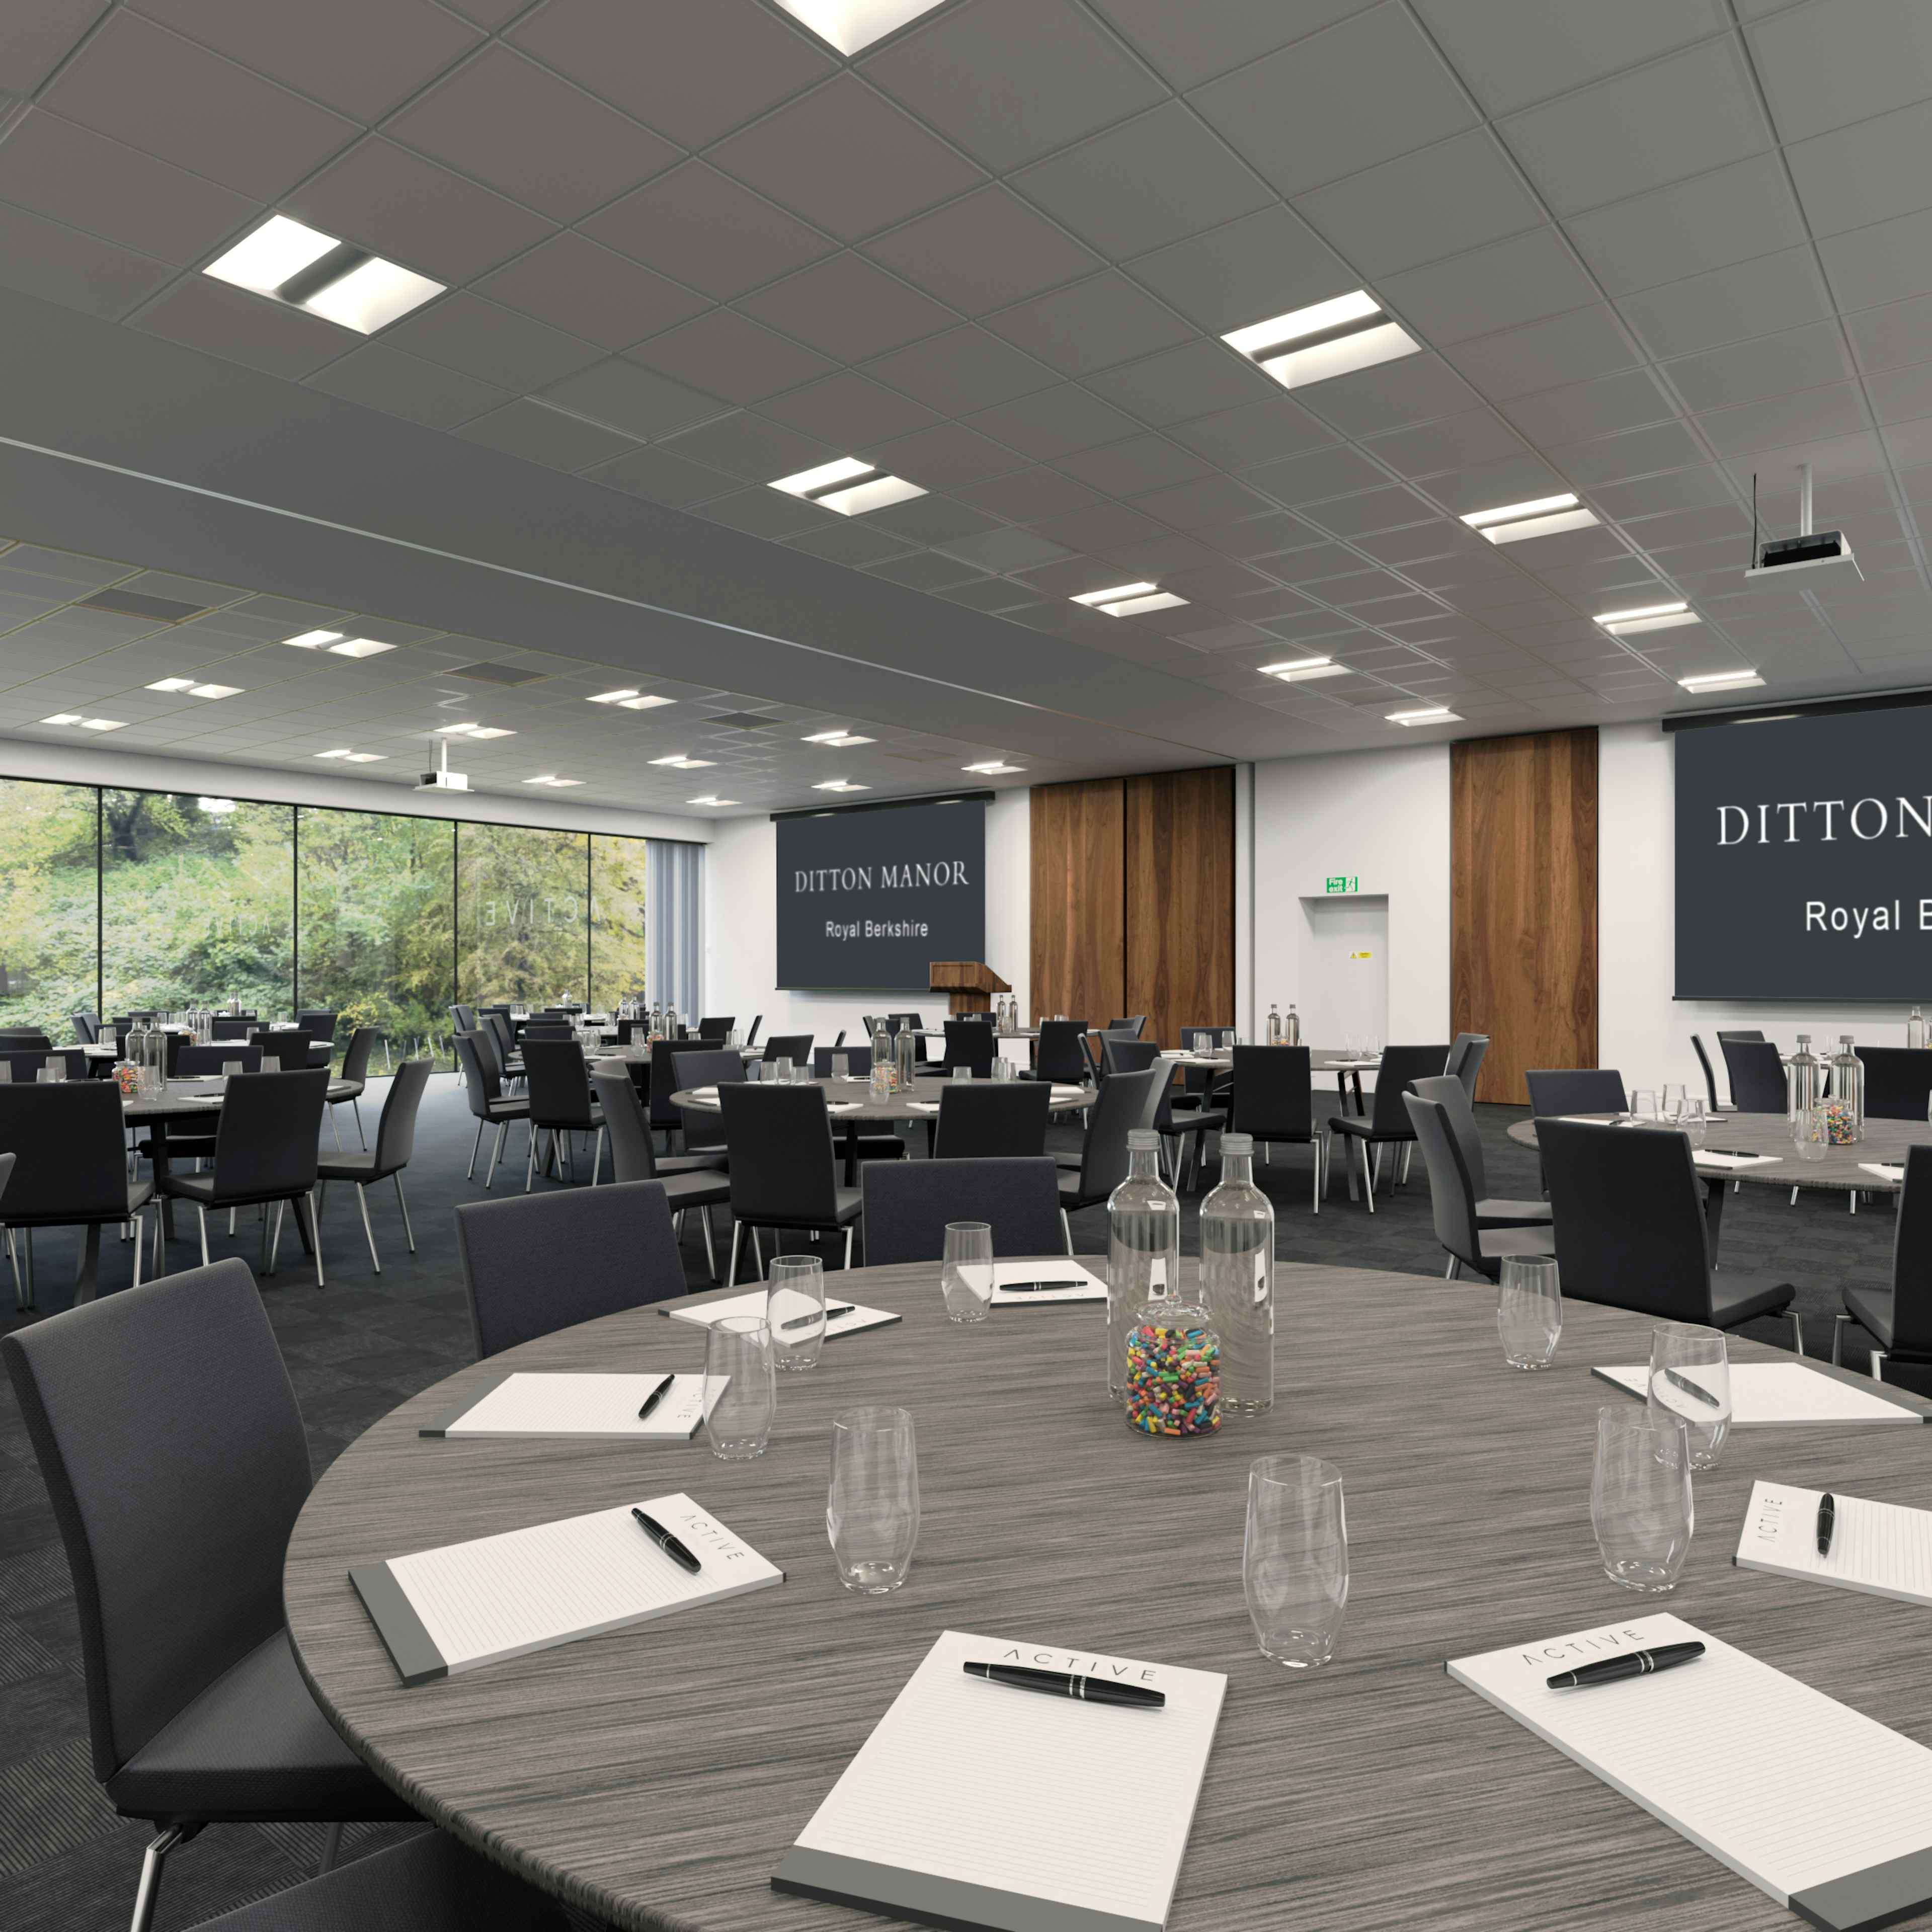 Ditton Manor - Southgate Conference Center image 1